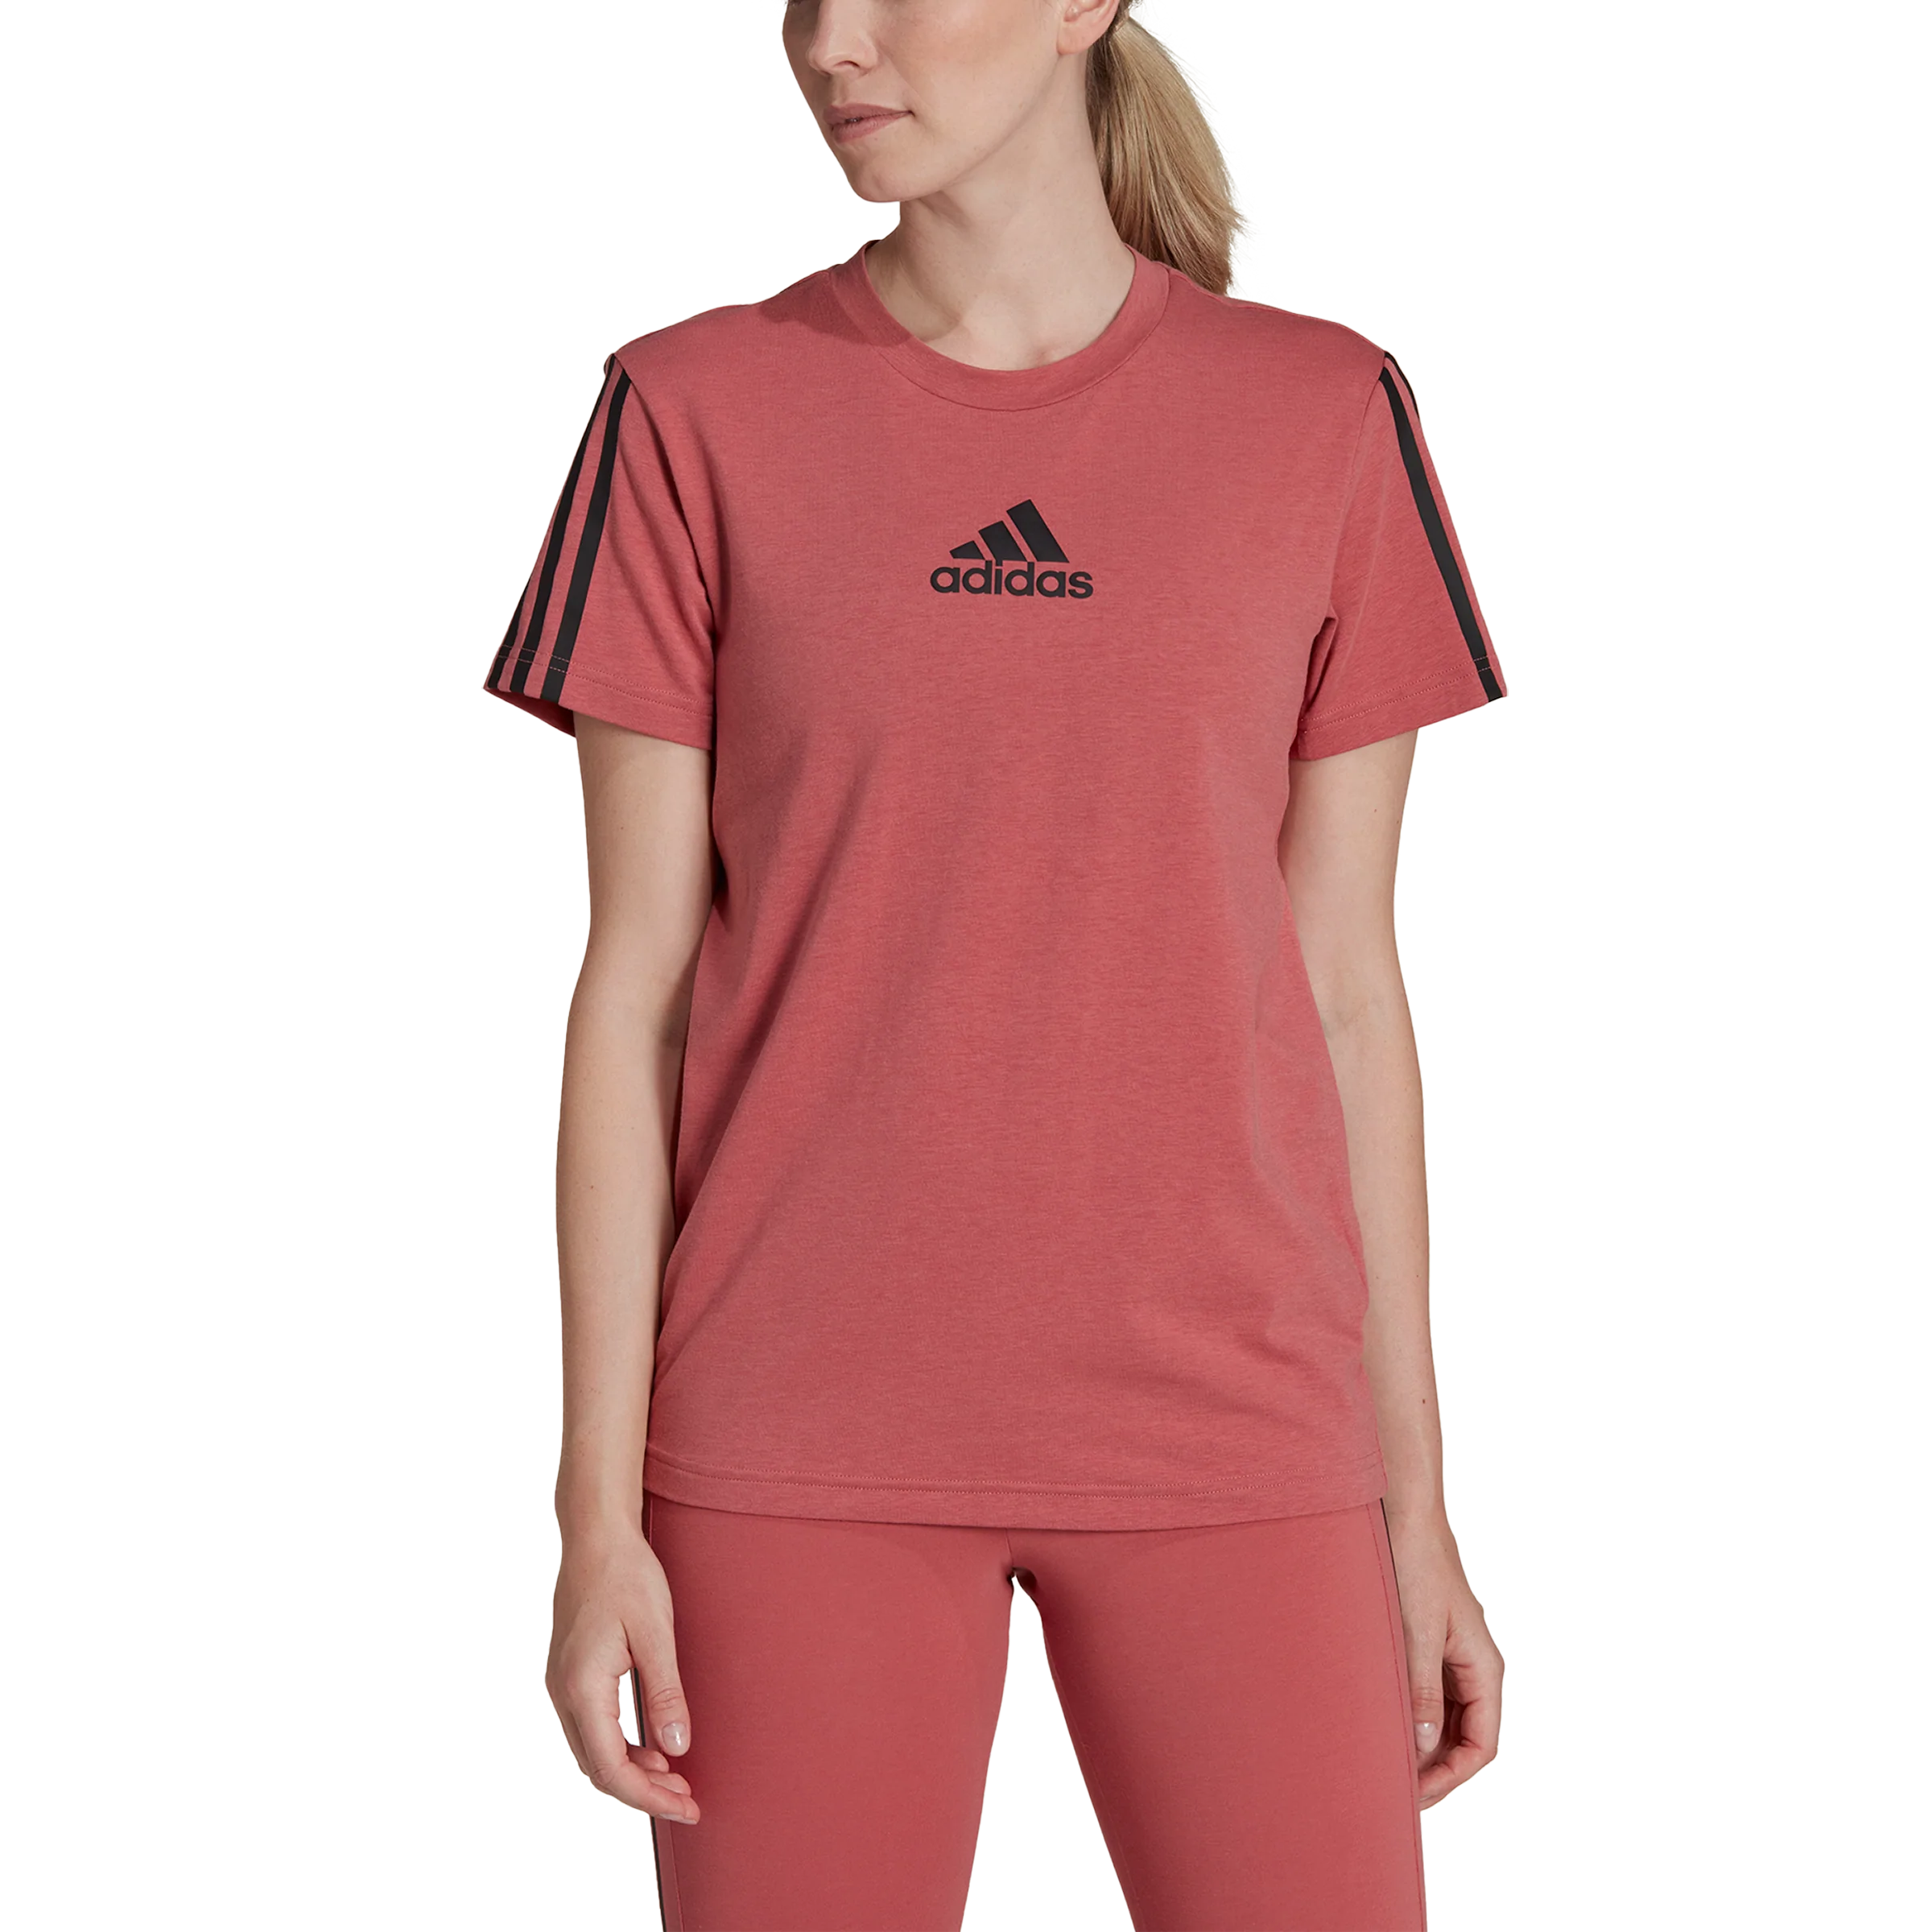 adidas Aeroready Made for Training Cotton Touch Tee - Womens - Red